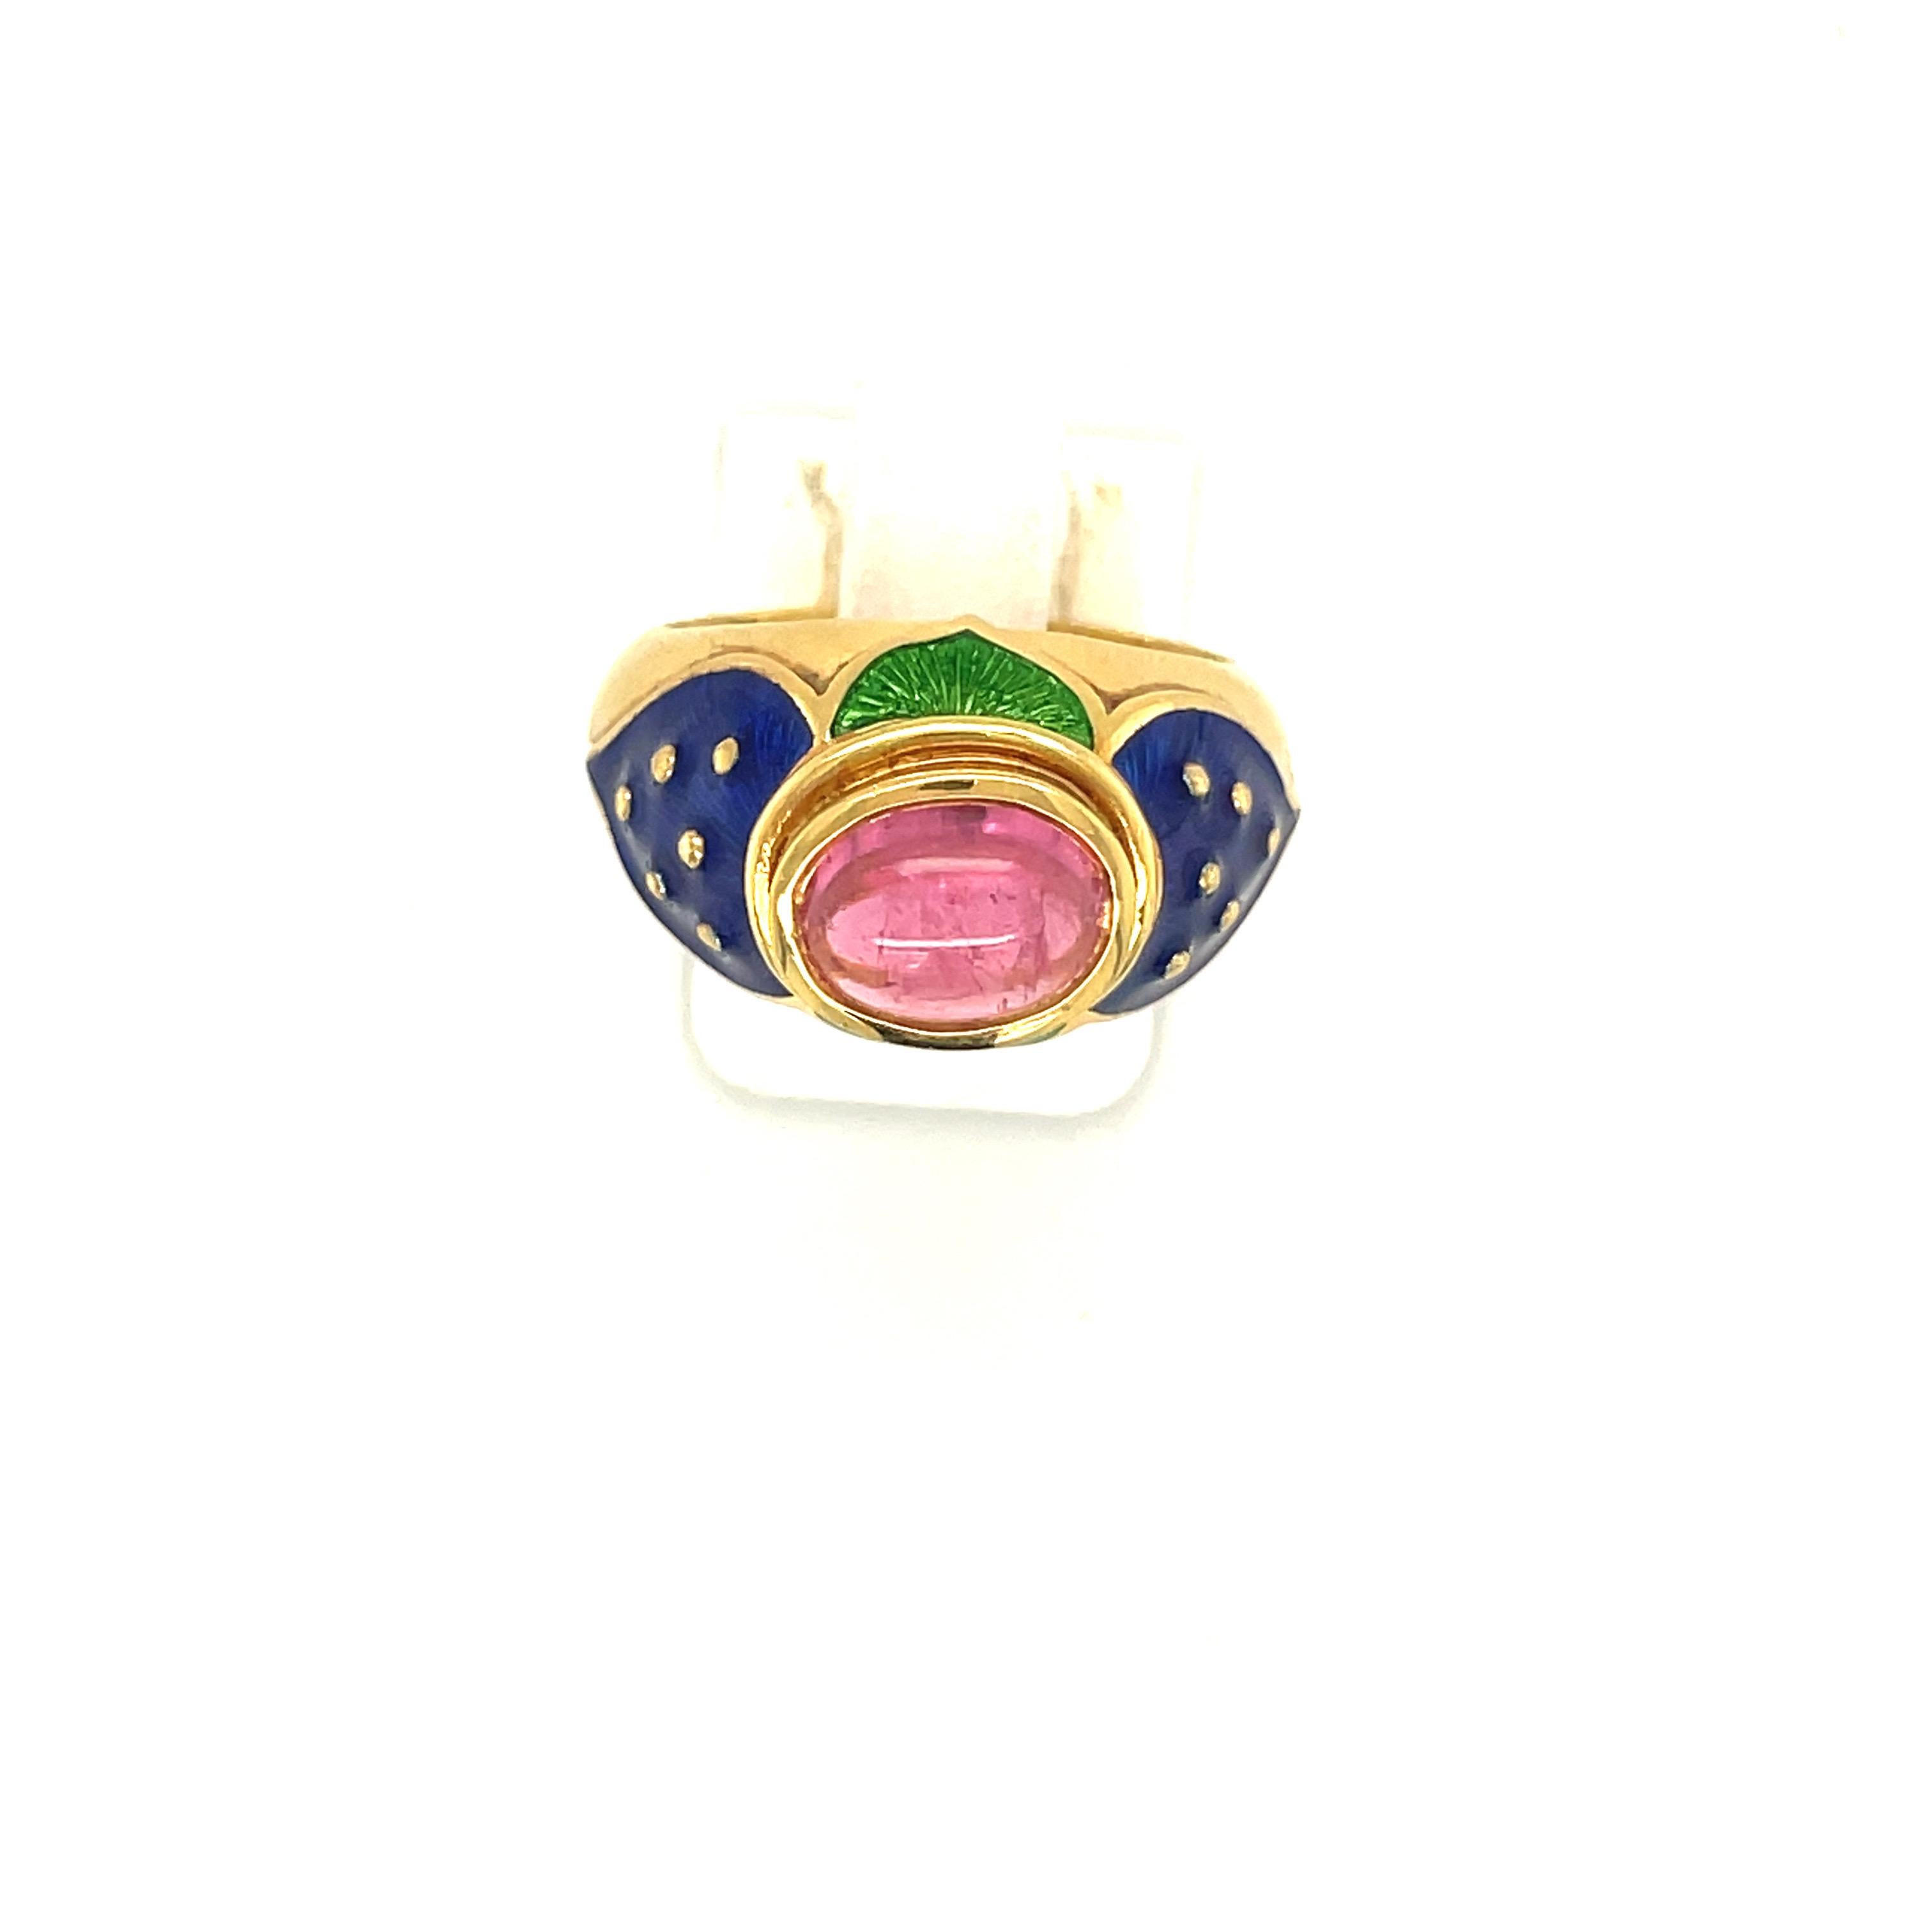 Cellini 18KT YG Ring with Cabochon Pink Tourmaline Center & Blue & Green Enamel In New Condition For Sale In New York, NY